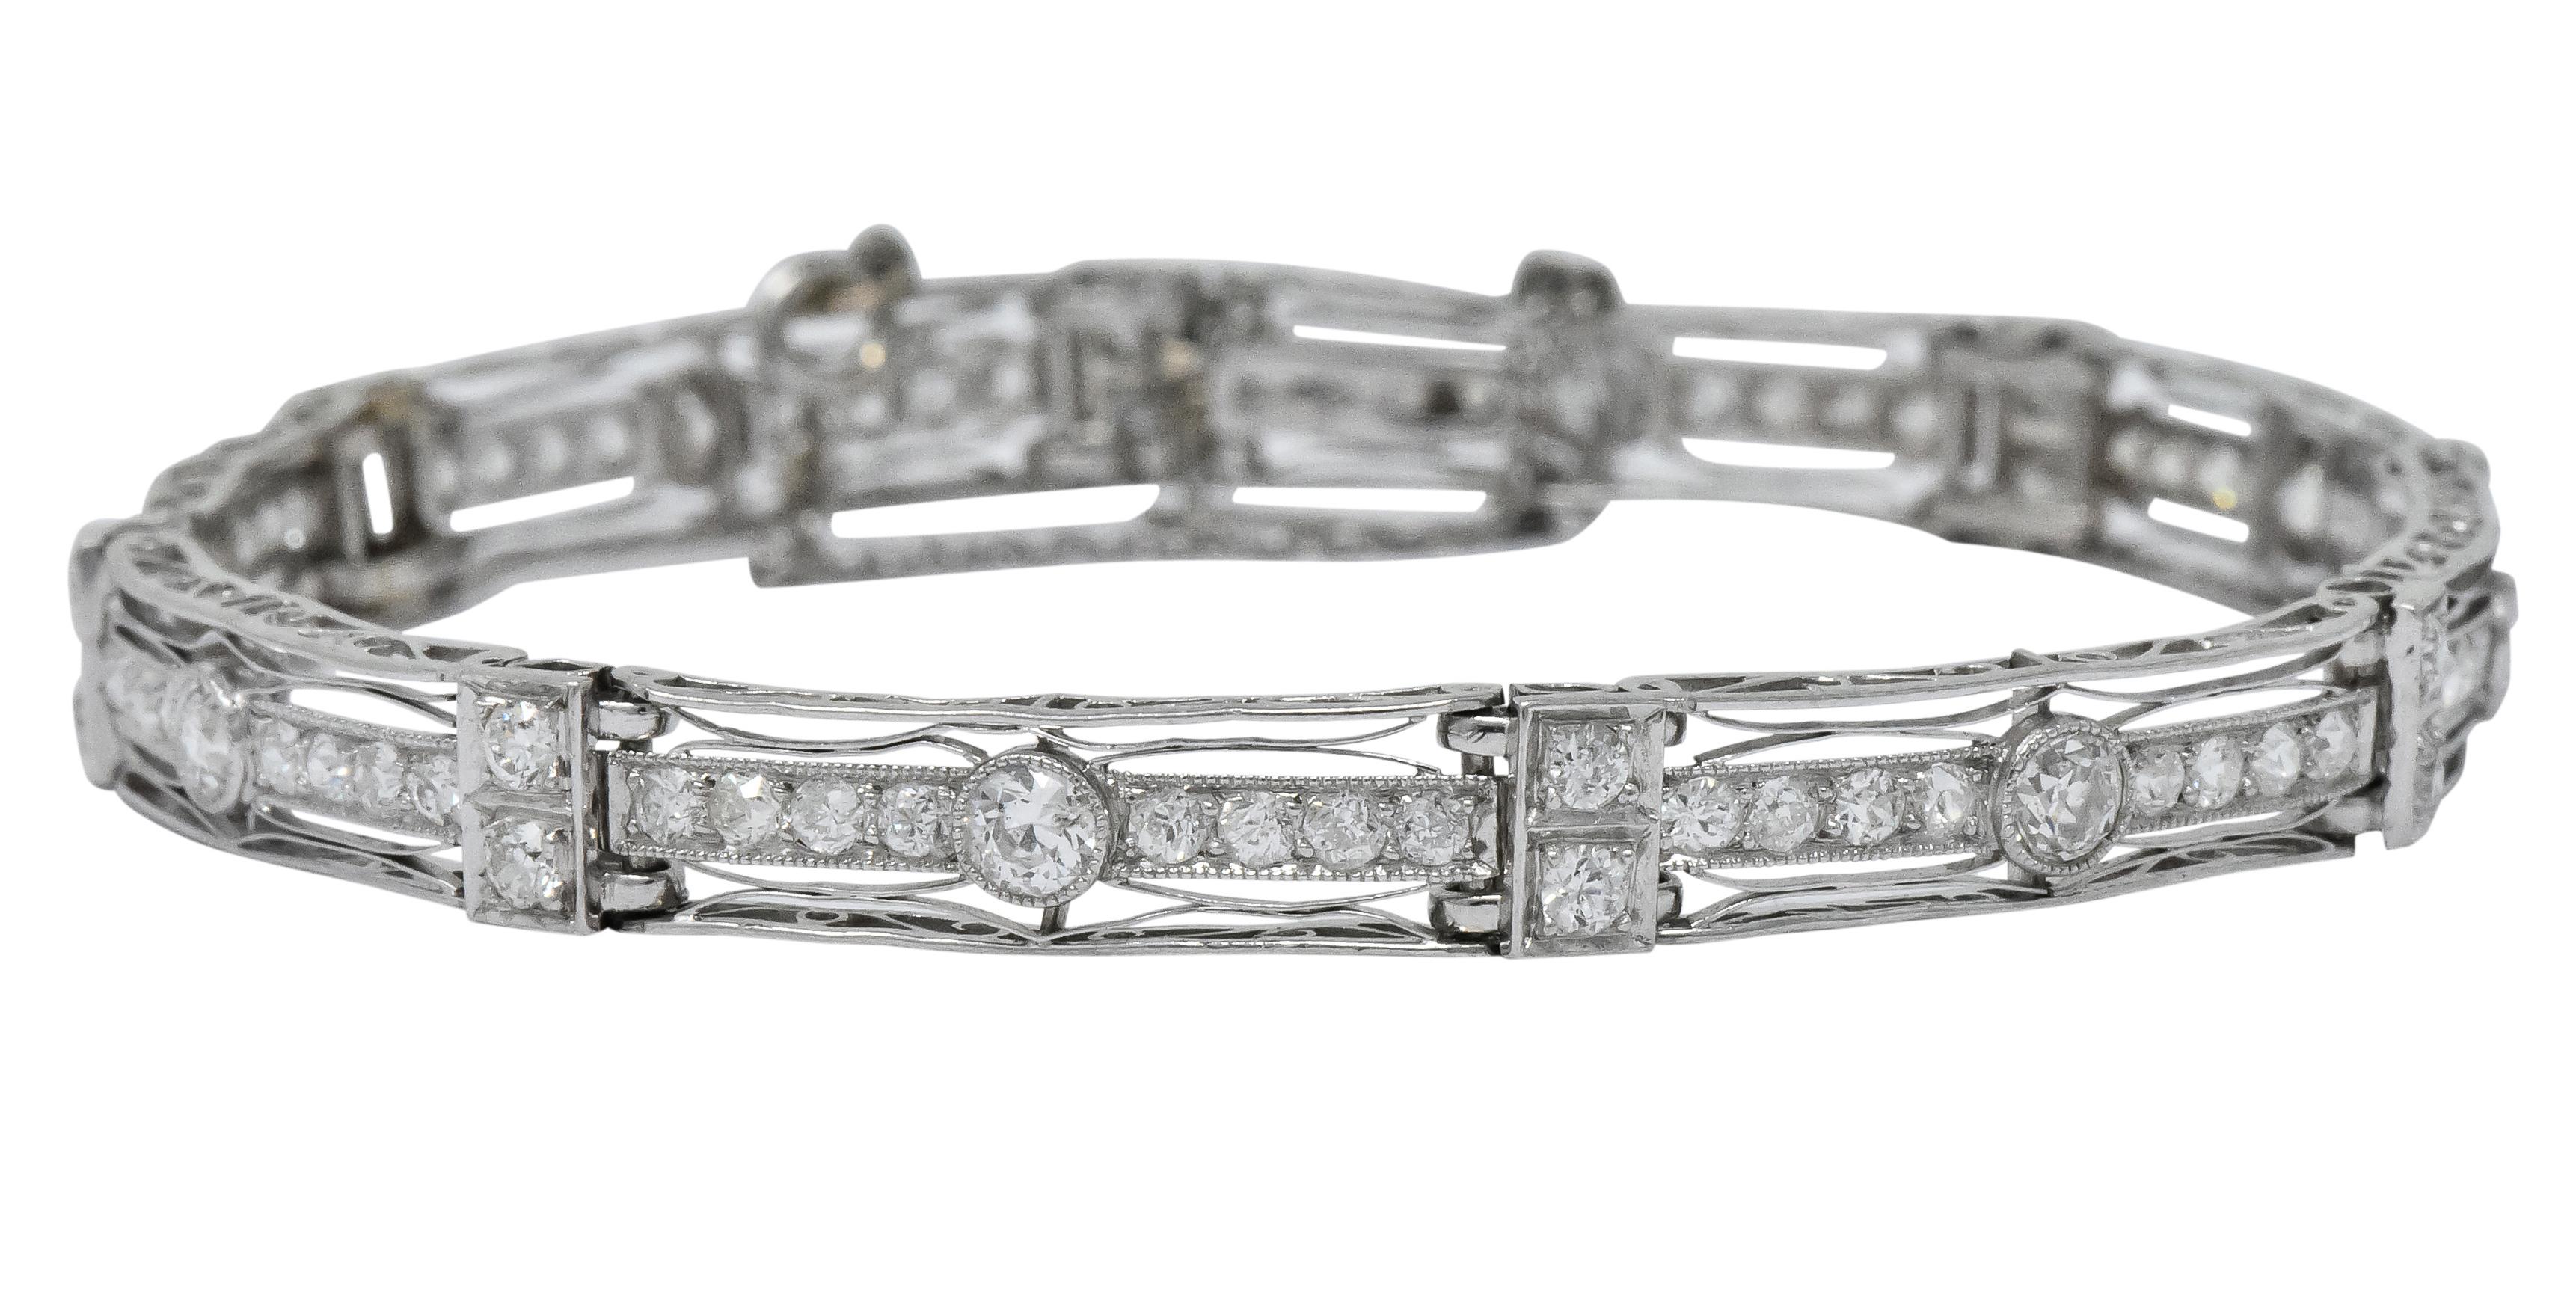 Featuring pierced millegeain wire-work frames with an old European cut diamond center flanked by smaller old European cut diamonds

Spacer links also contain old European cut diamonds

Total diamond weight approximately 3.85 carats, GHI color and VS